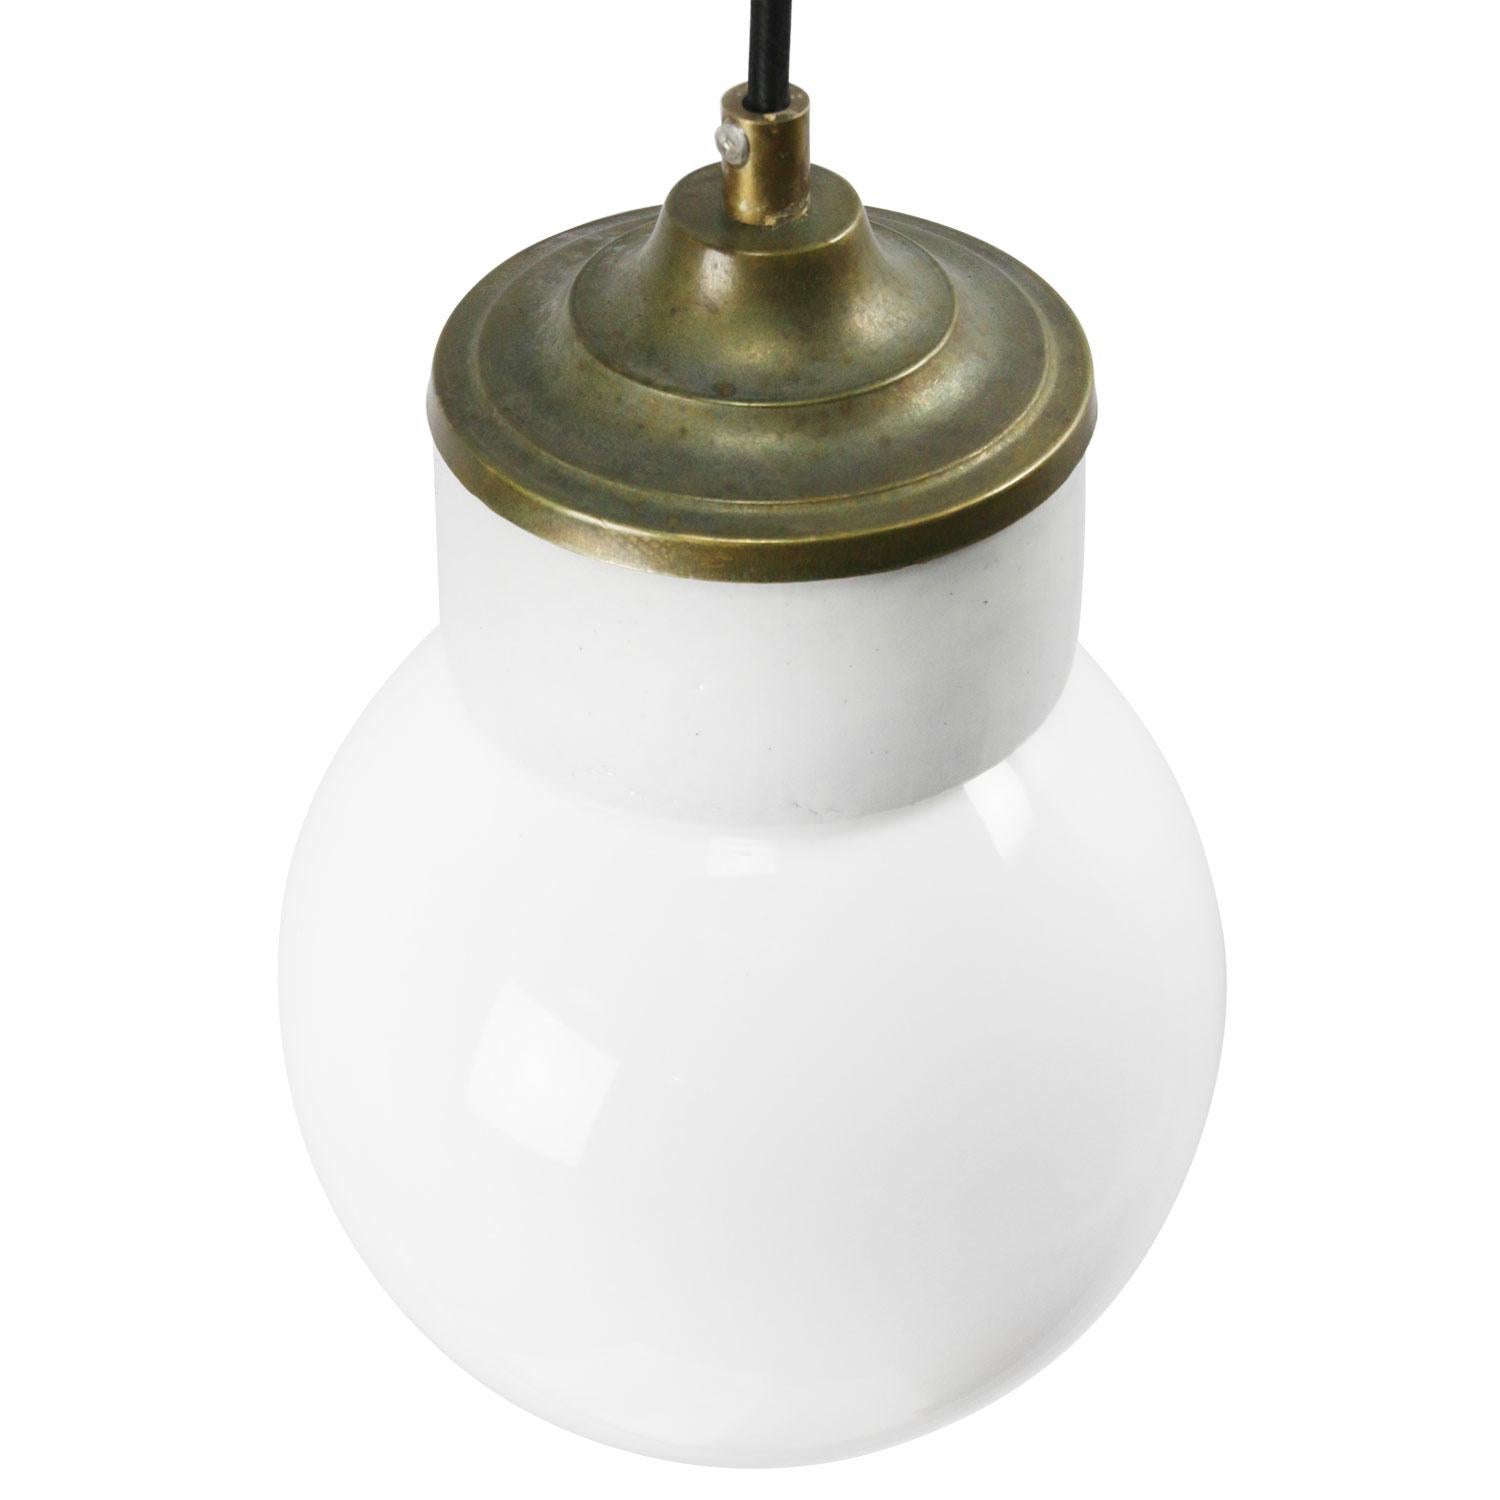 Porcelain industrial hanging lamp.
White porcelain, brass and clear glass.
2 conductors, no ground.

Weight: 1.20 kg / 2.6 lb

Priced per individual item. All lamps have been made suitable by international standards for incandescent light